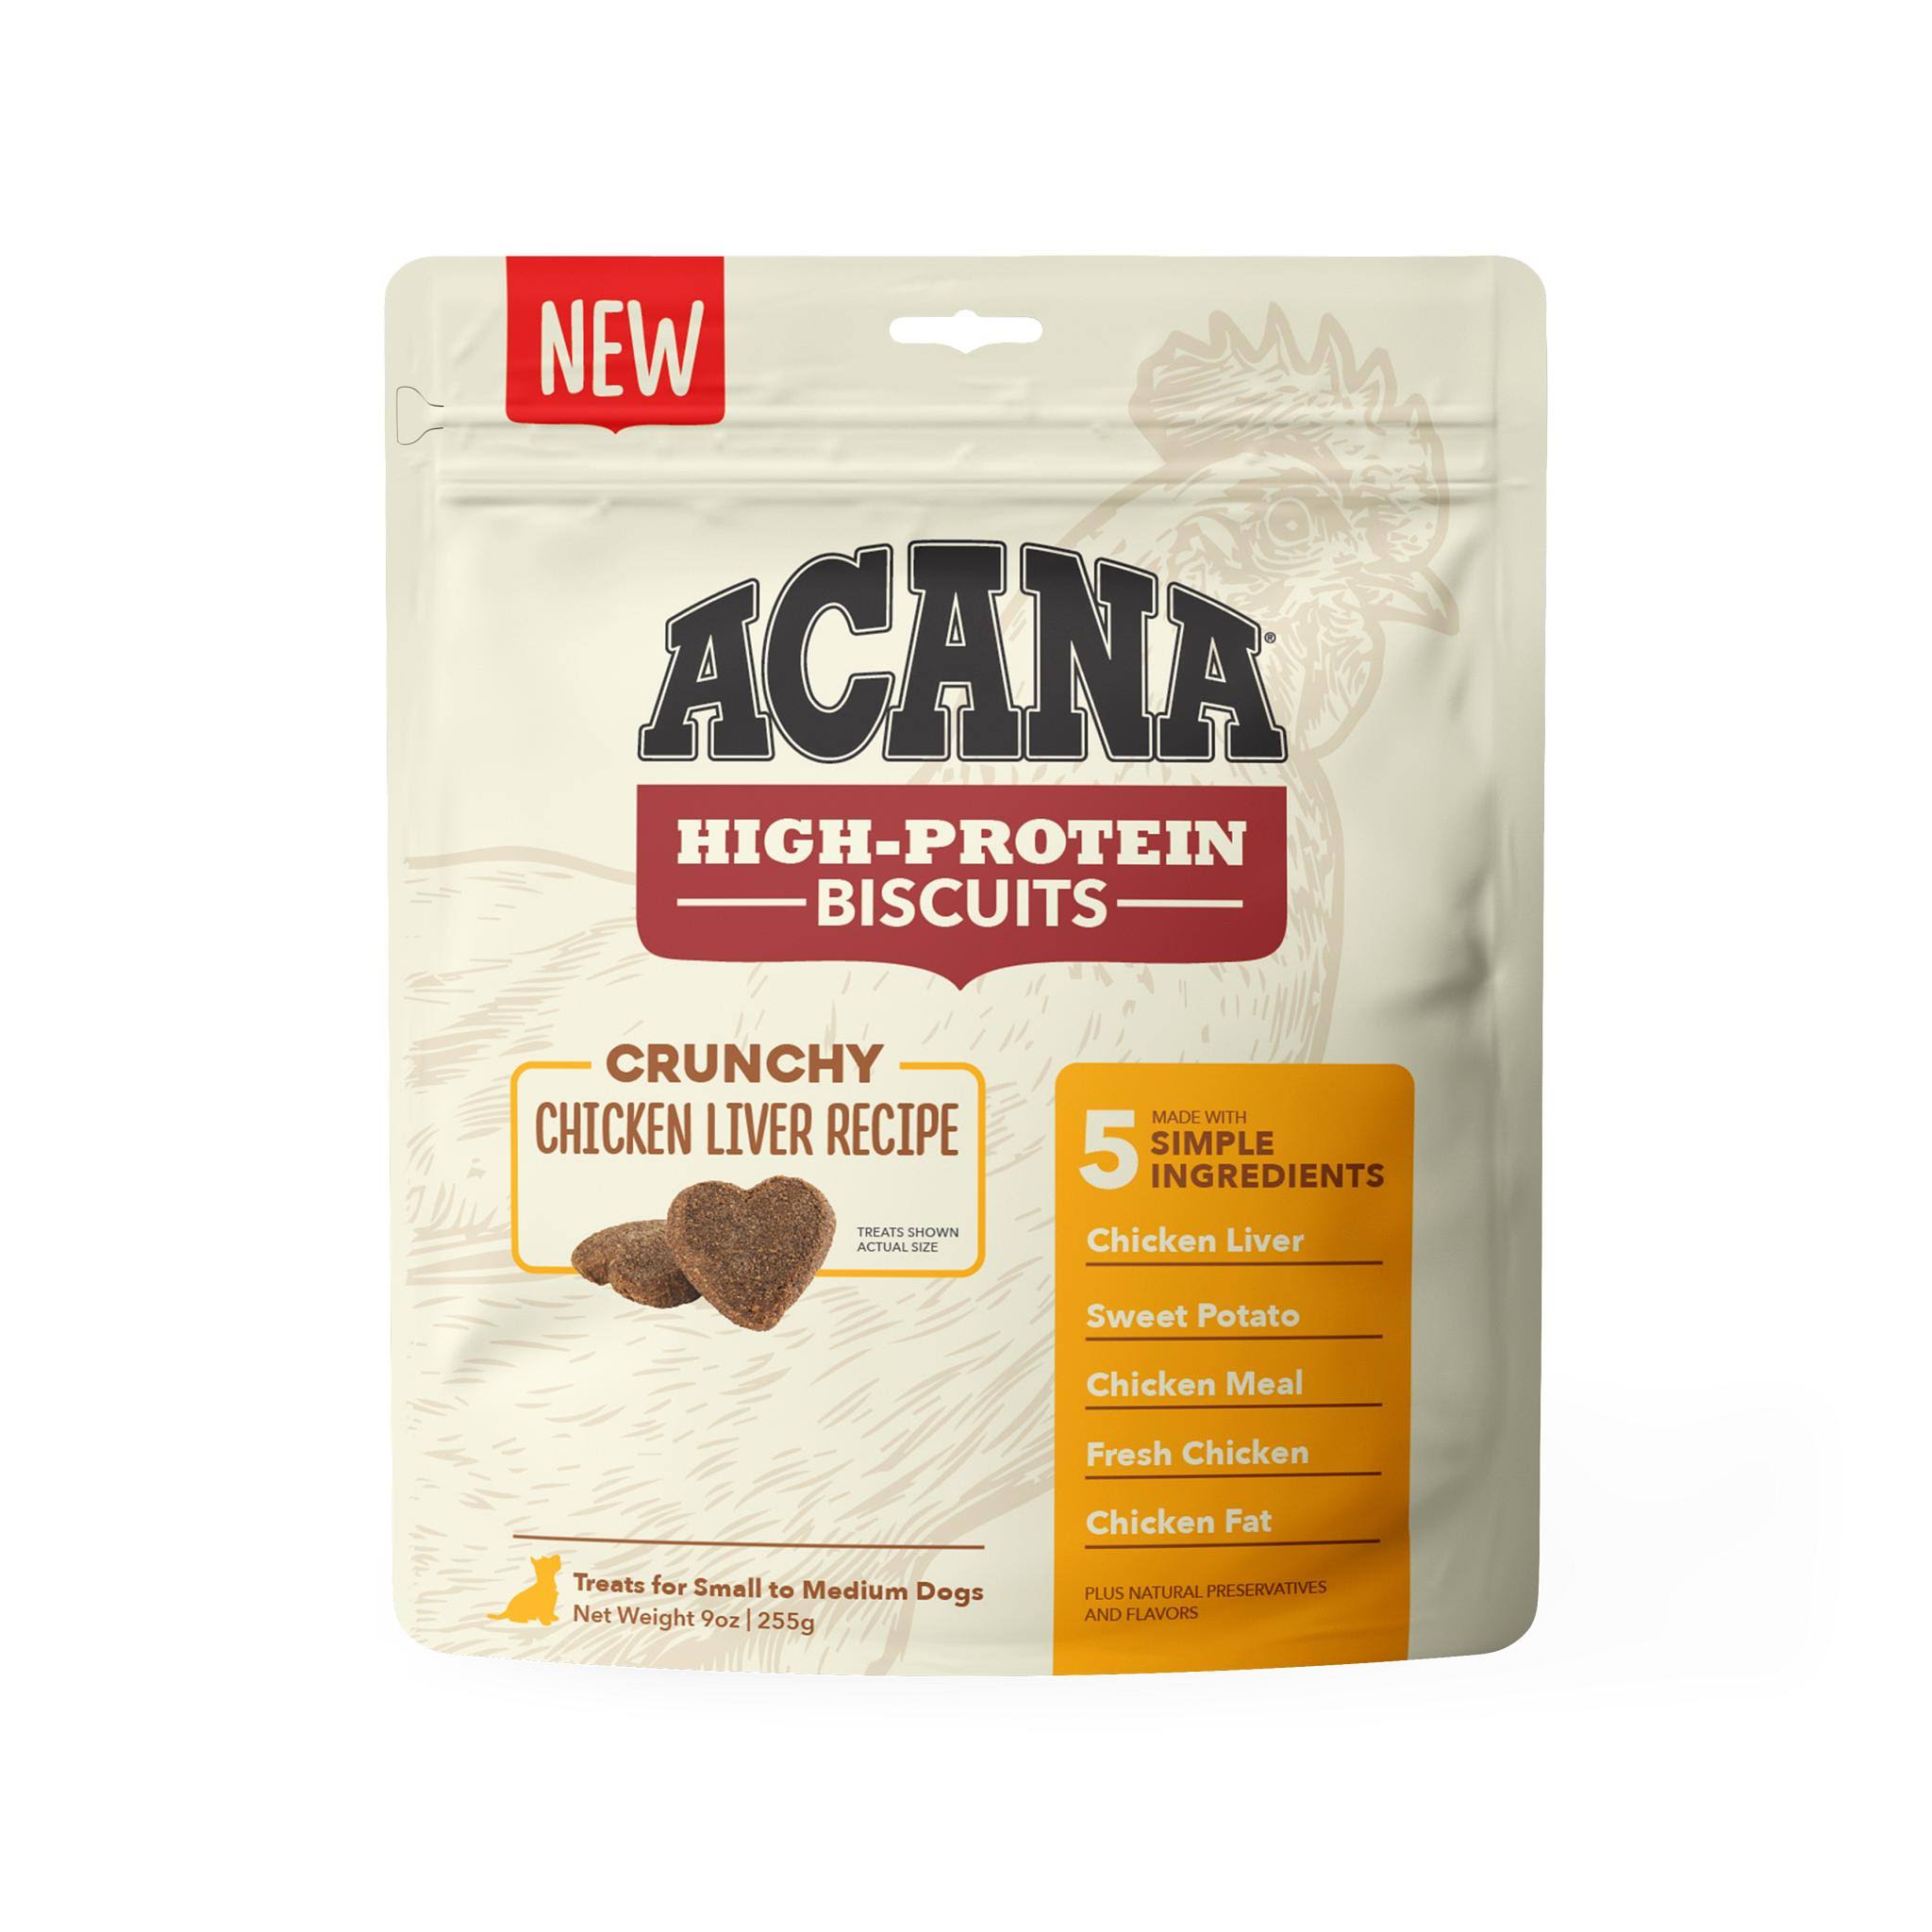 ACANA Crunchy Biscuits Chicken Liver Recipe Dog Treats, Small